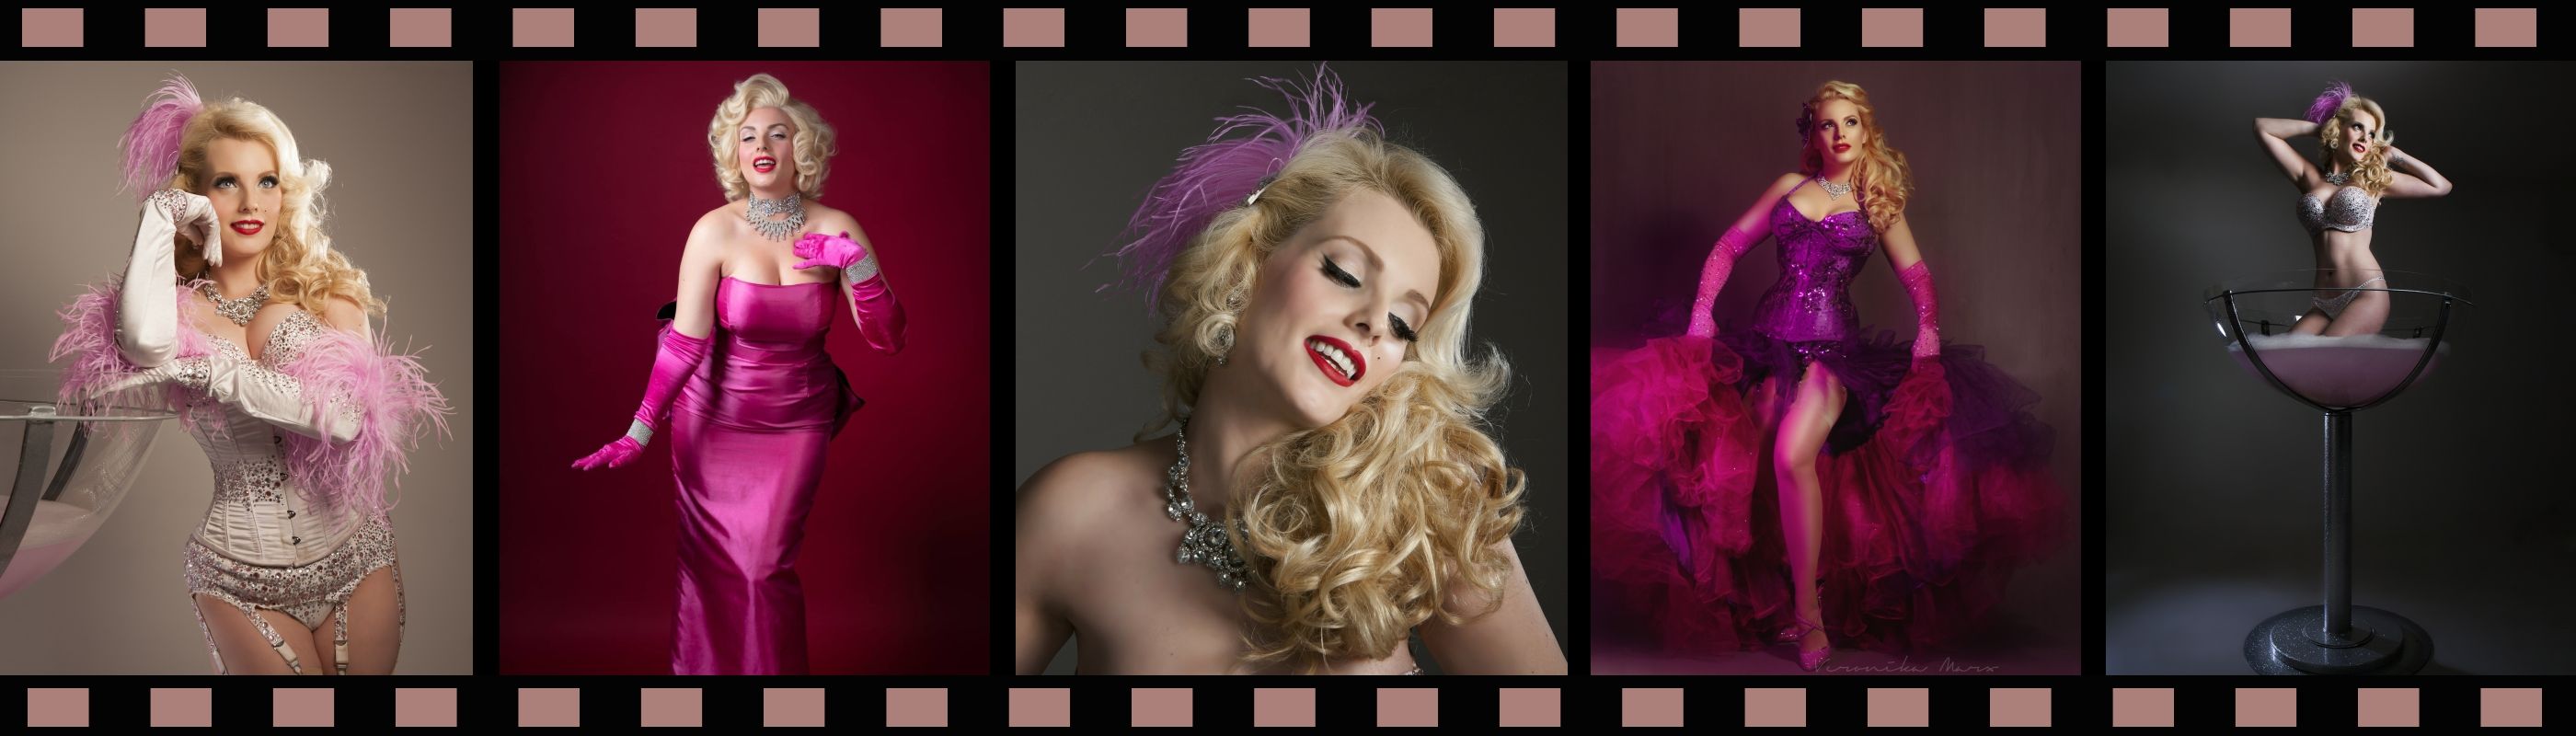 isabella bliss biography burlesque star and marilyn monroe act